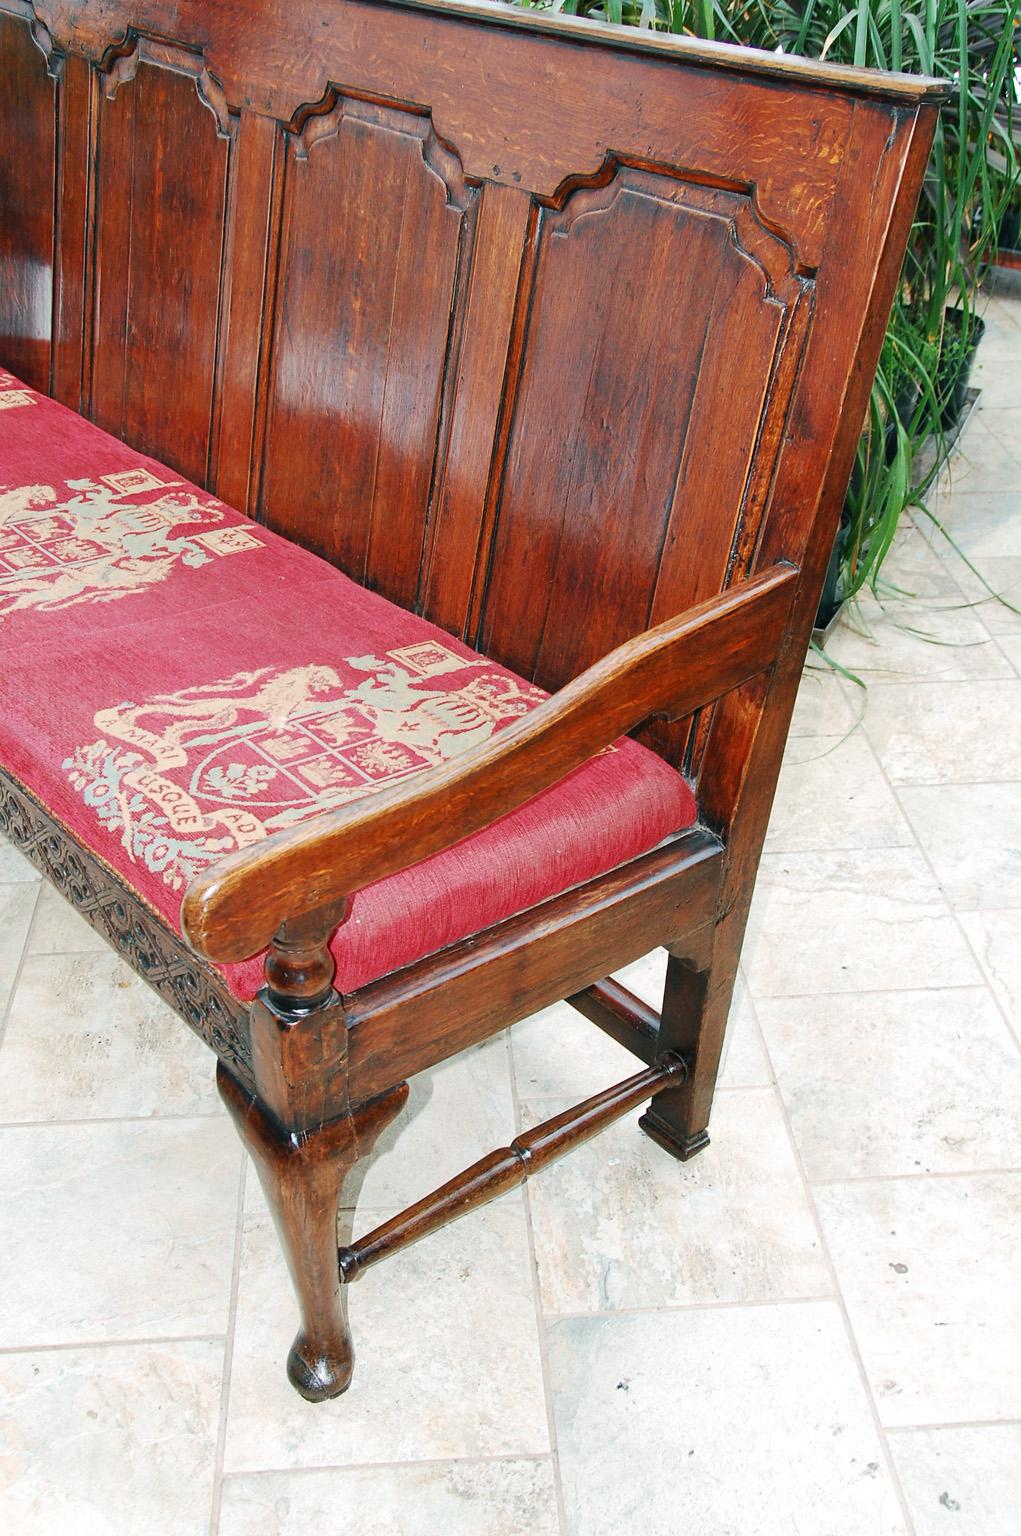 18th Century English George II Oak Settle with Paneled Back, Carved Front Rail, Cabriole Legs